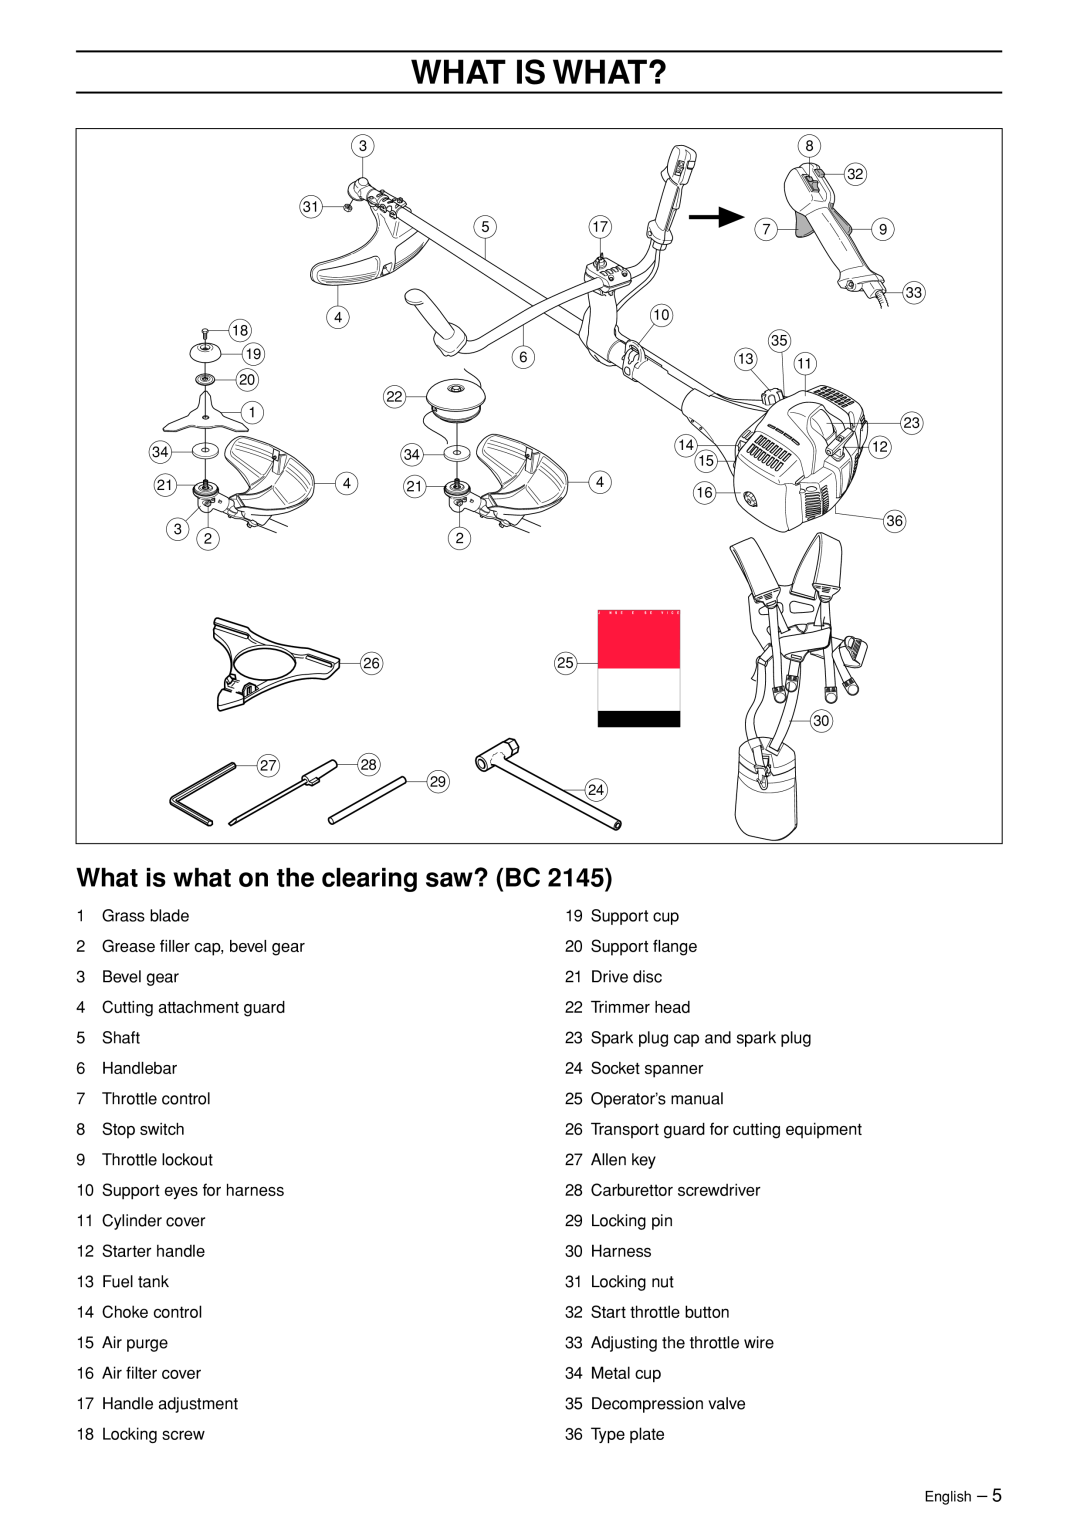 Jonsered CC 2145 manual What Is What?, What is what on the clearing saw? BC 